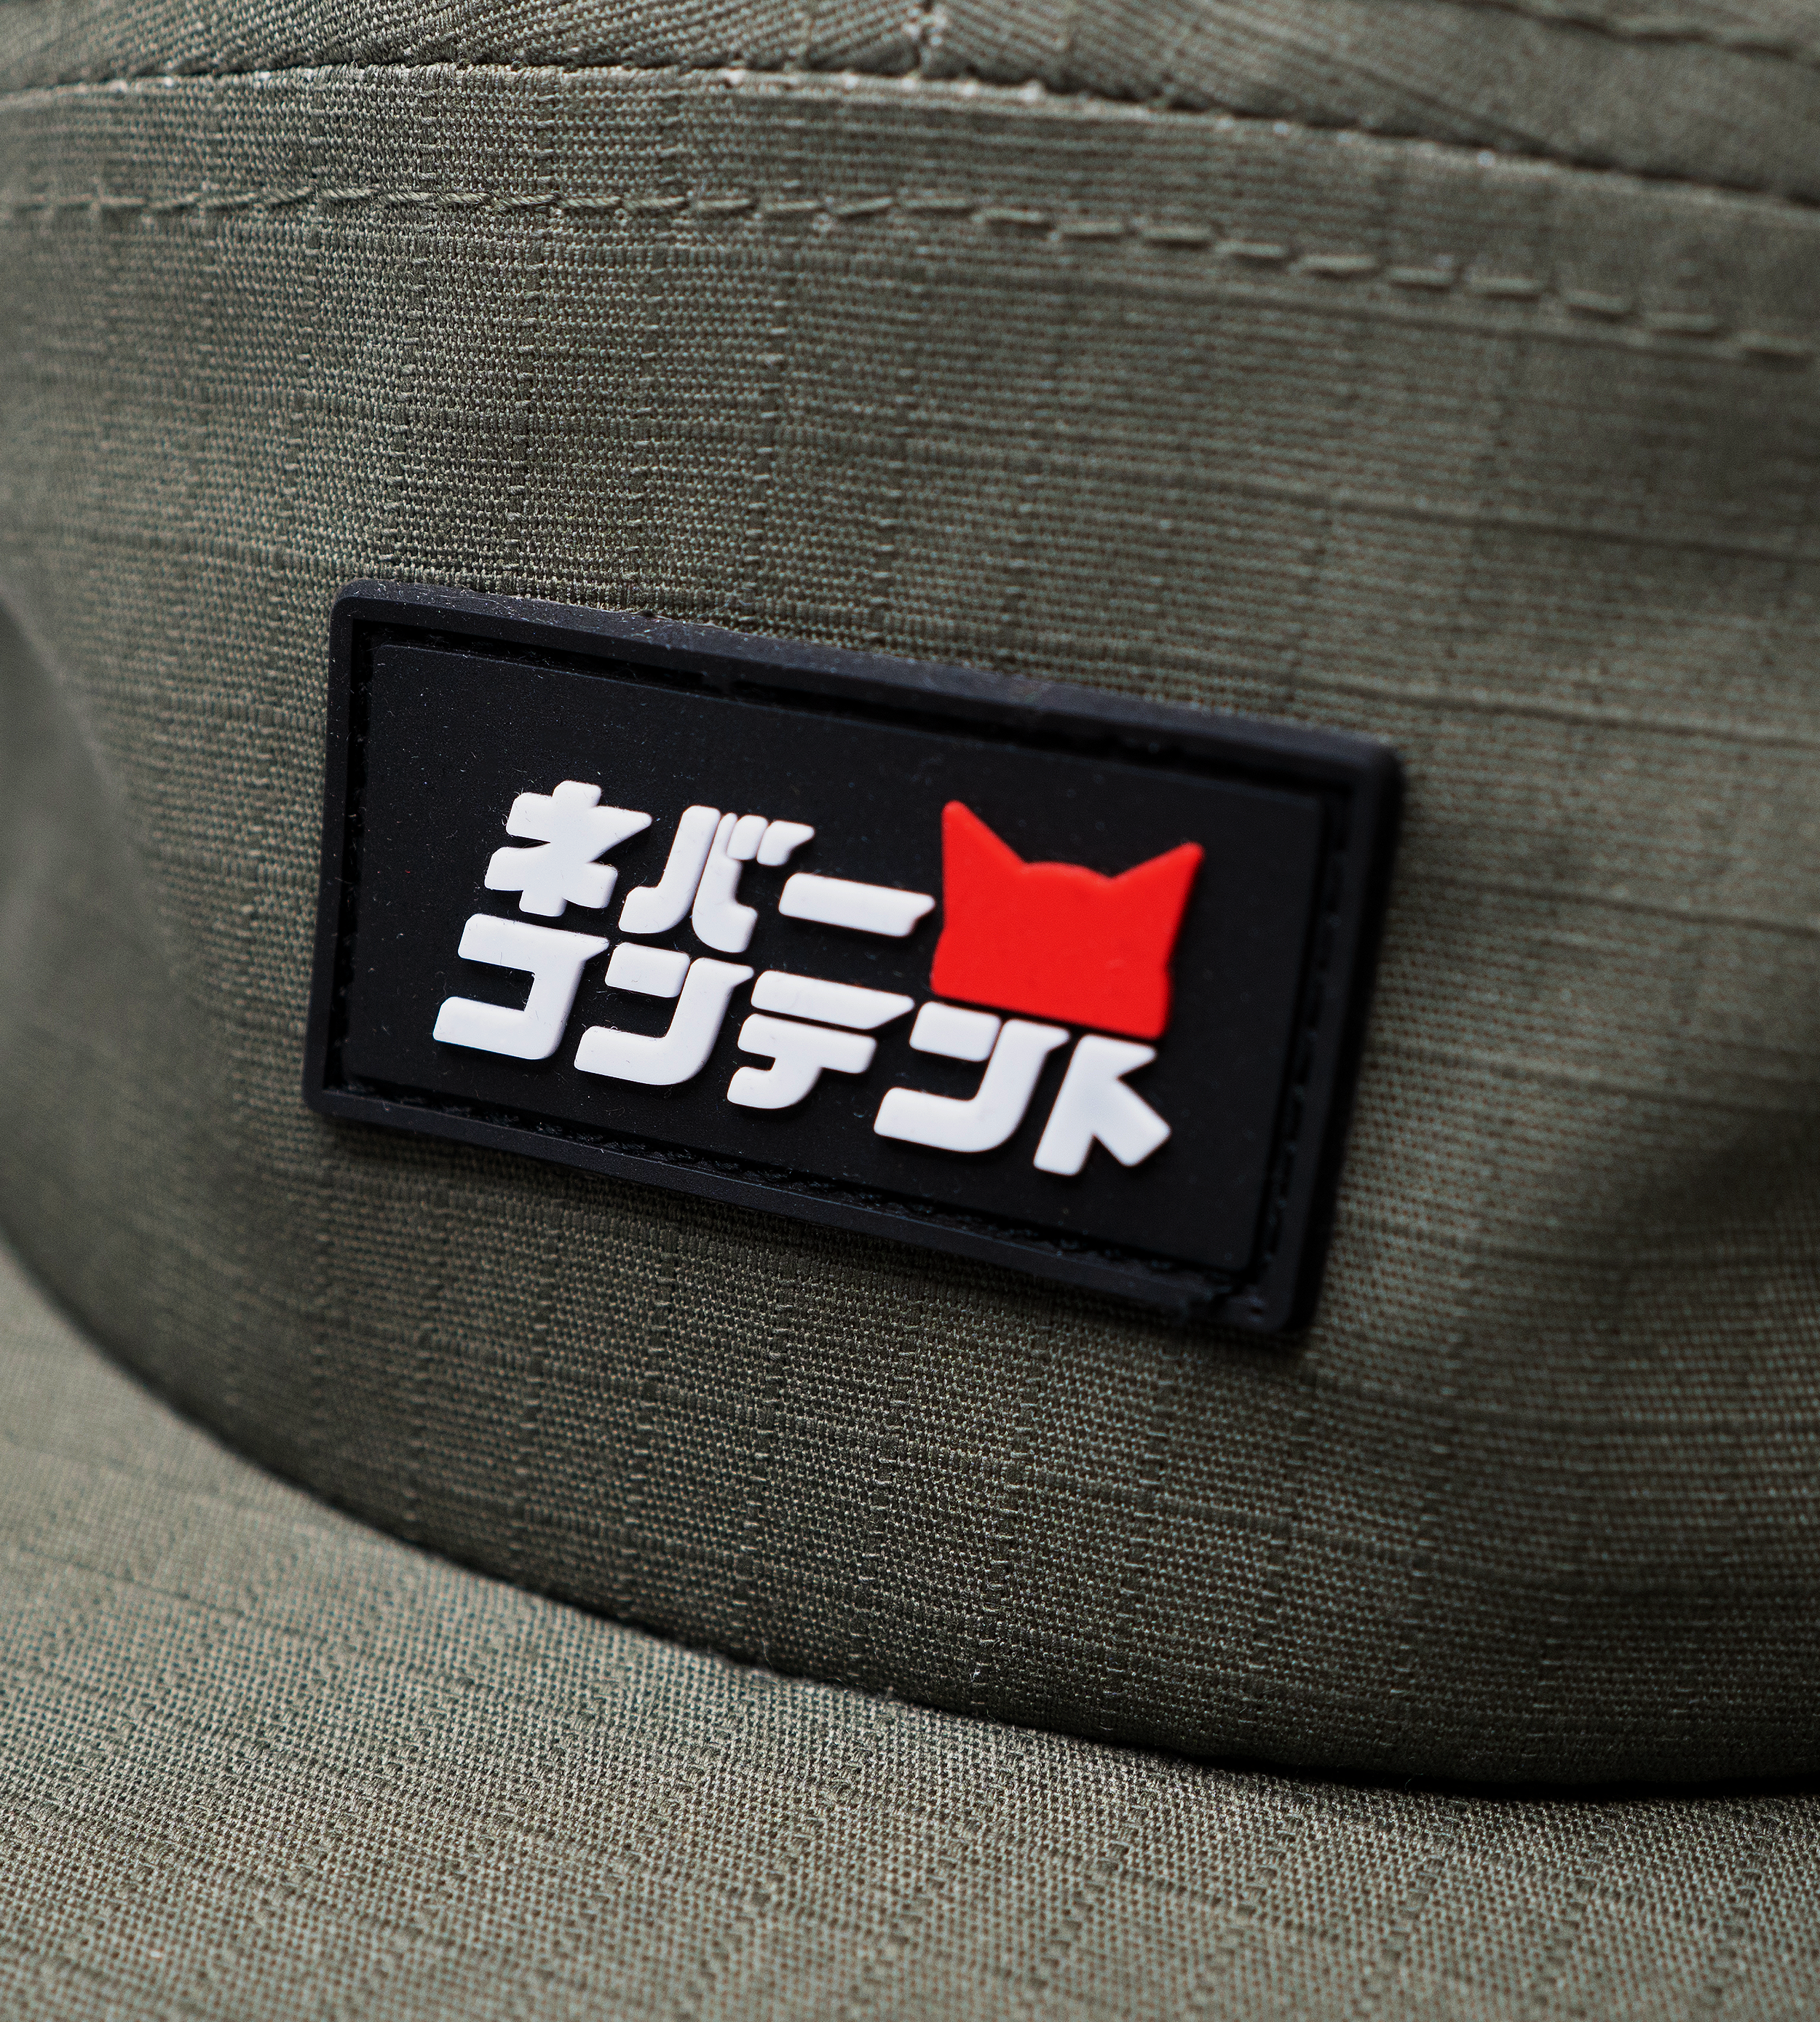 CSB - Olive Camp Hat